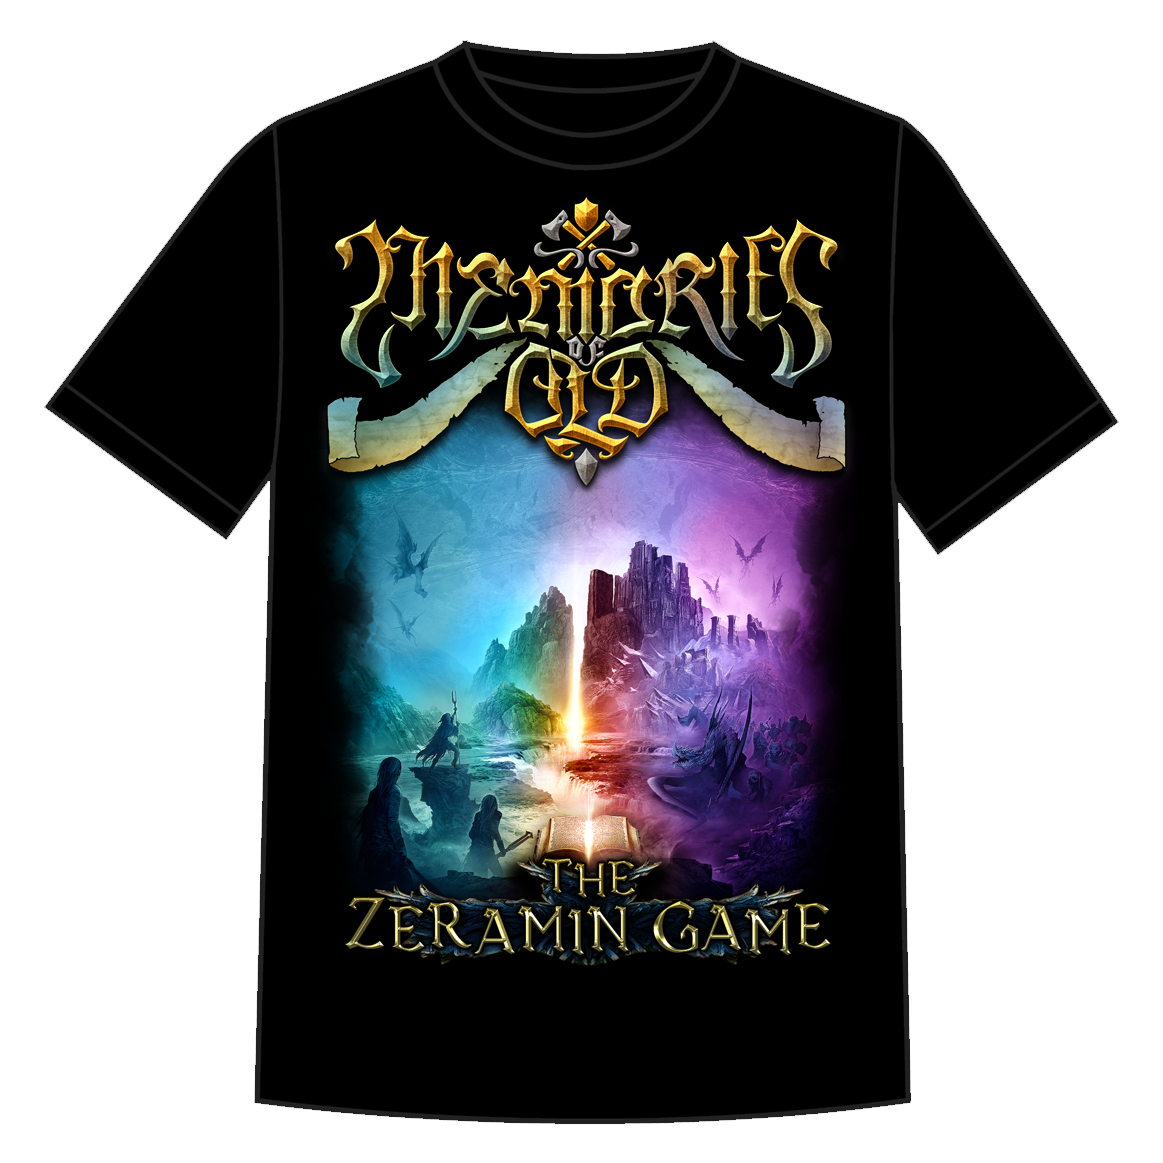 MEMORIES OF OLD - The Zeramin Game T-Shirt size L